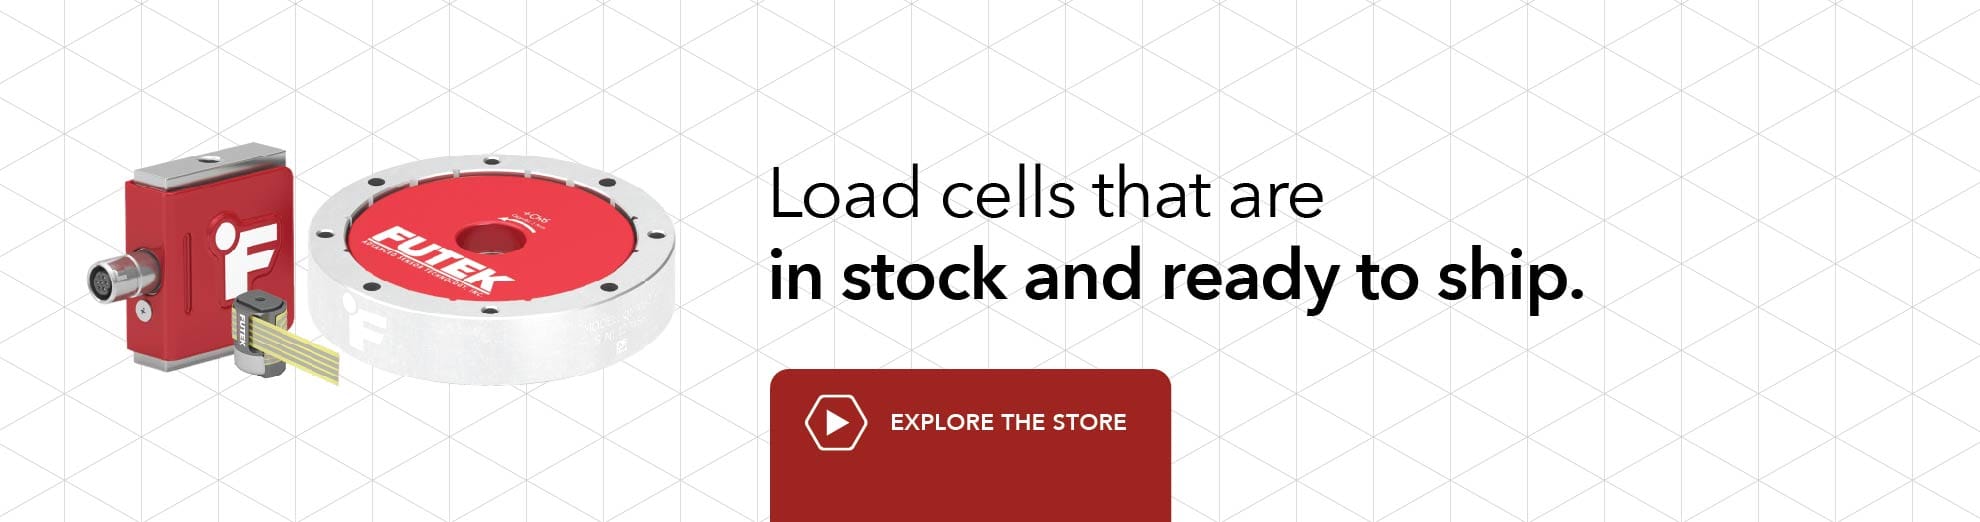 Load cells that are in stock and ready to ship. Explore the store